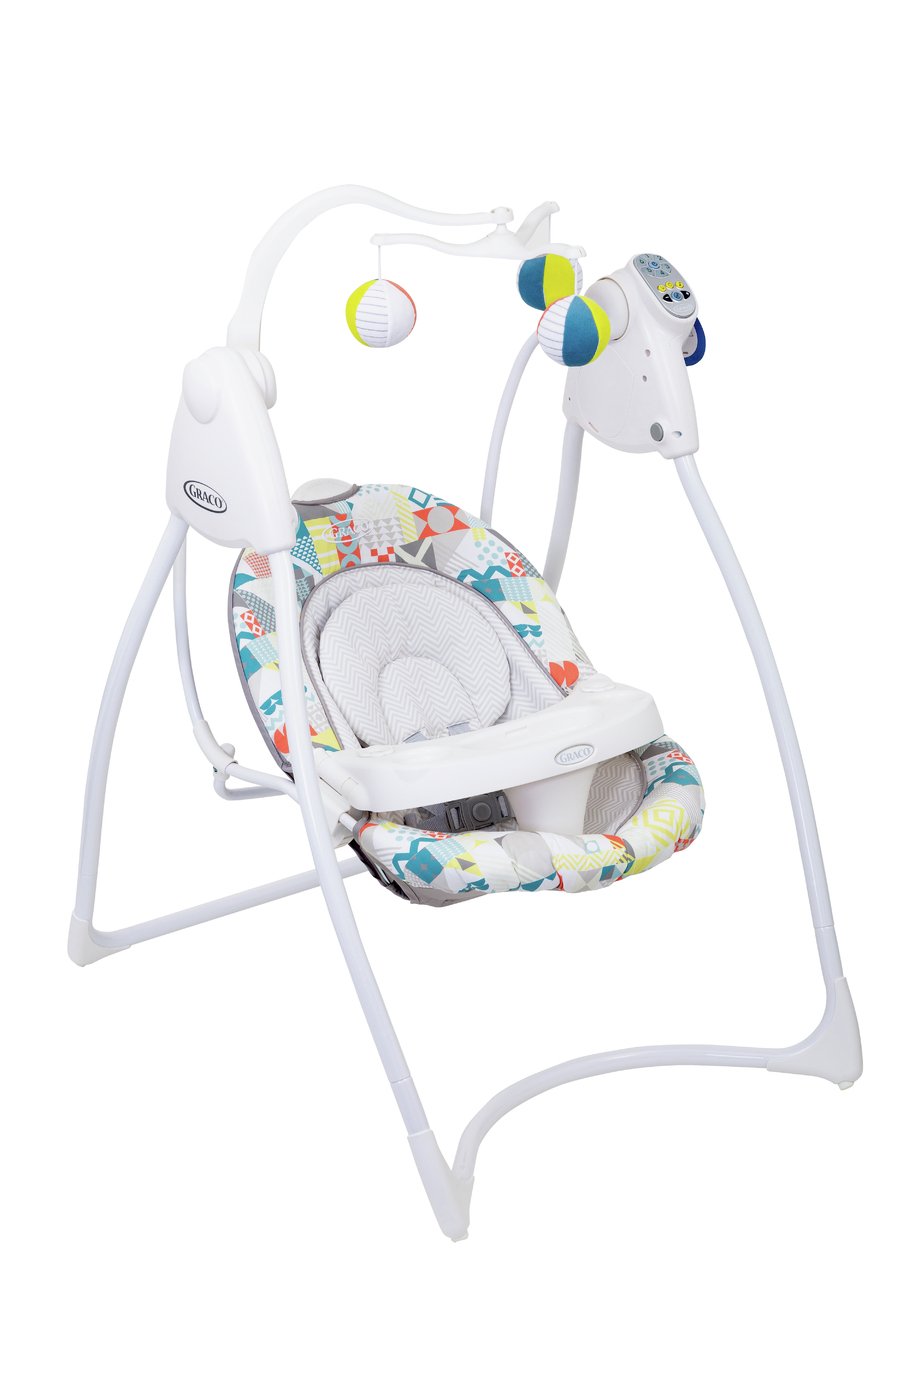 Graco Loving Hug Swing with Plug Patchwork Review